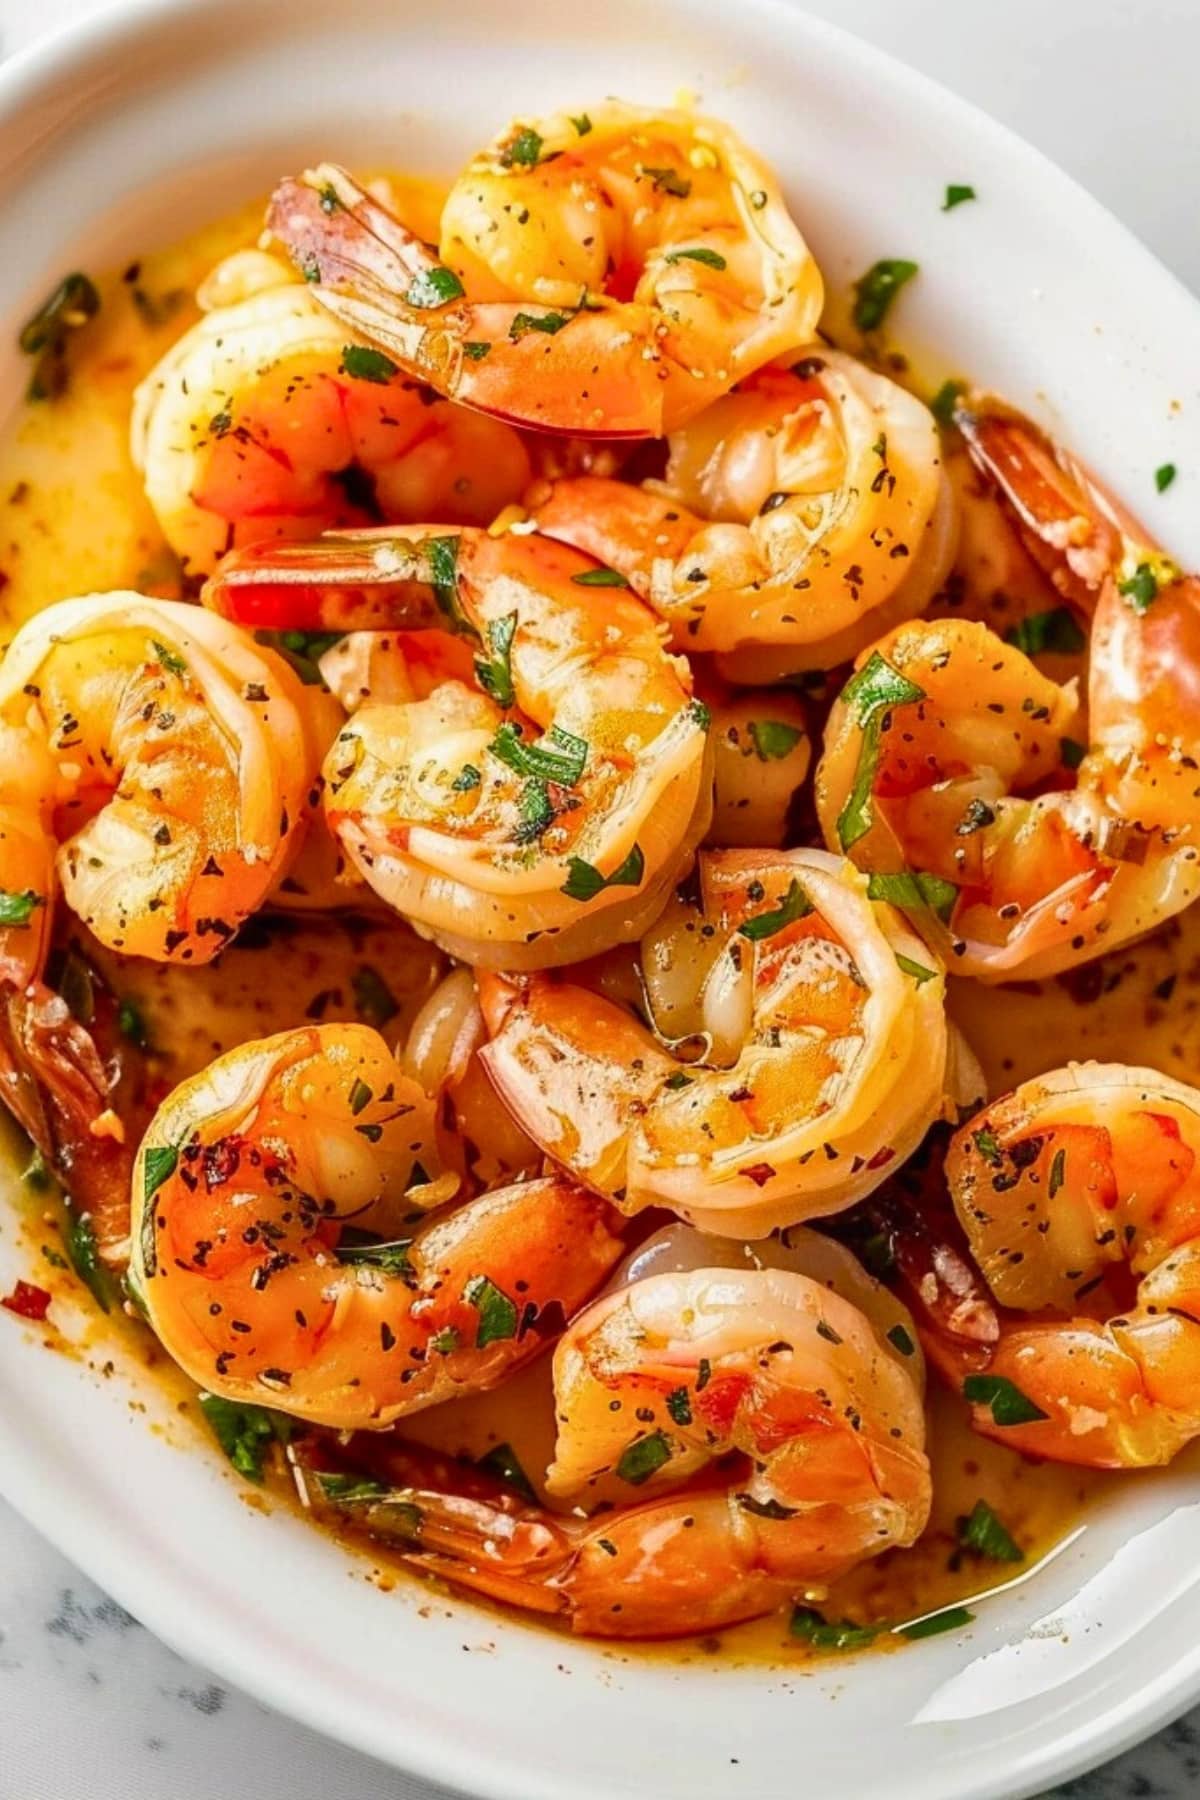 Shrimp with garlic butter sauce garnished with chopped parsley leaves.